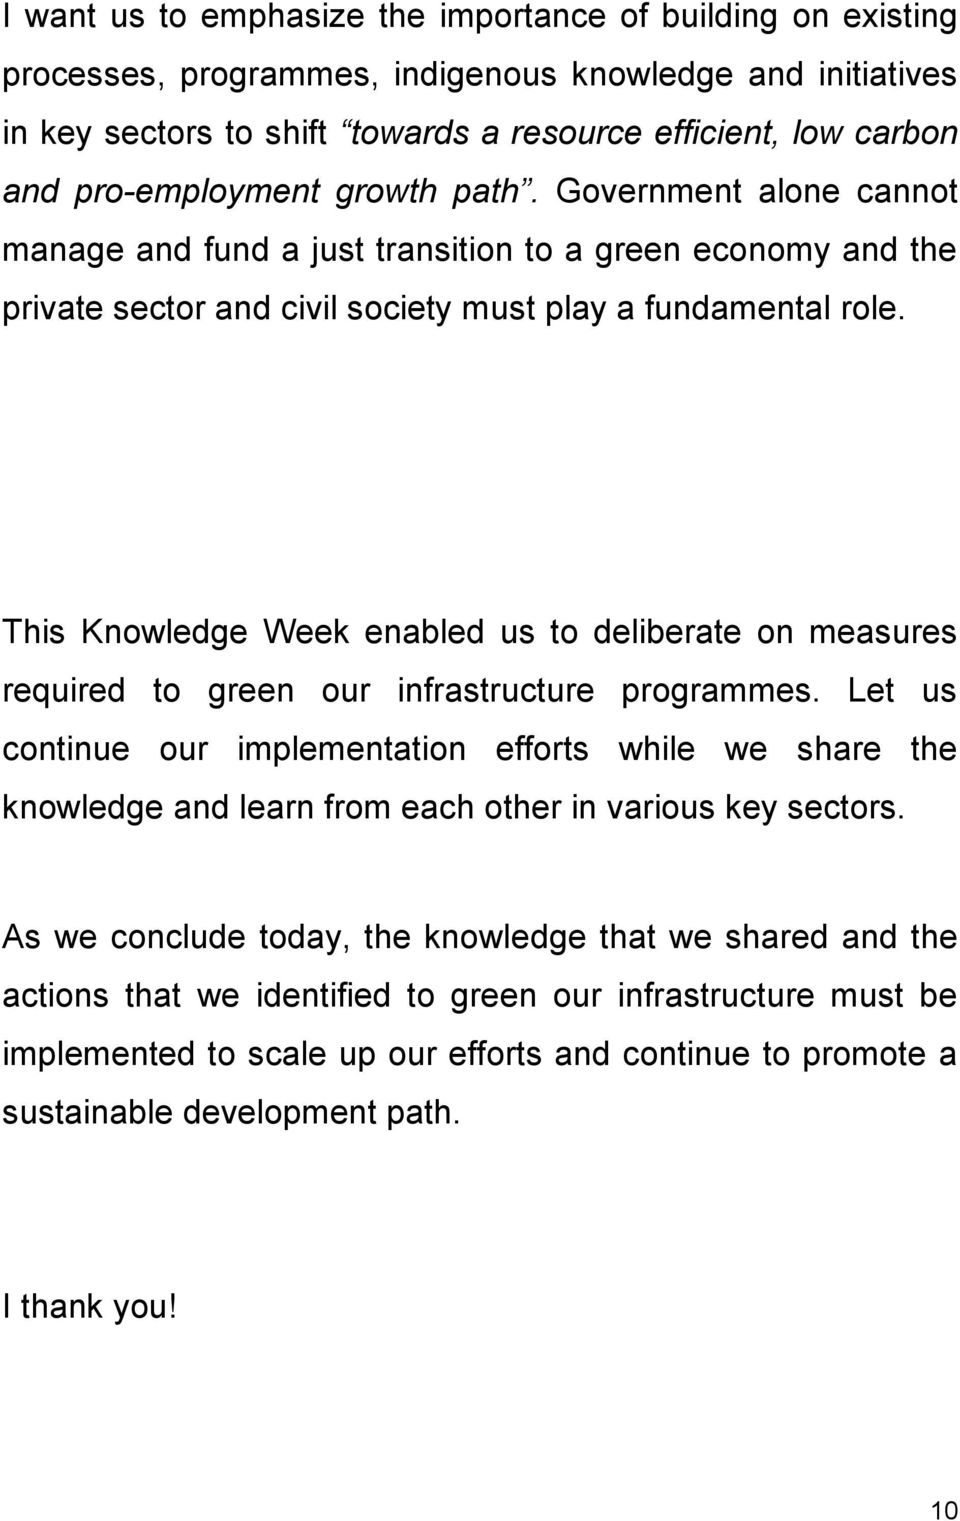 This Knowledge Week enabled us to deliberate on measures required to green our infrastructure programmes.